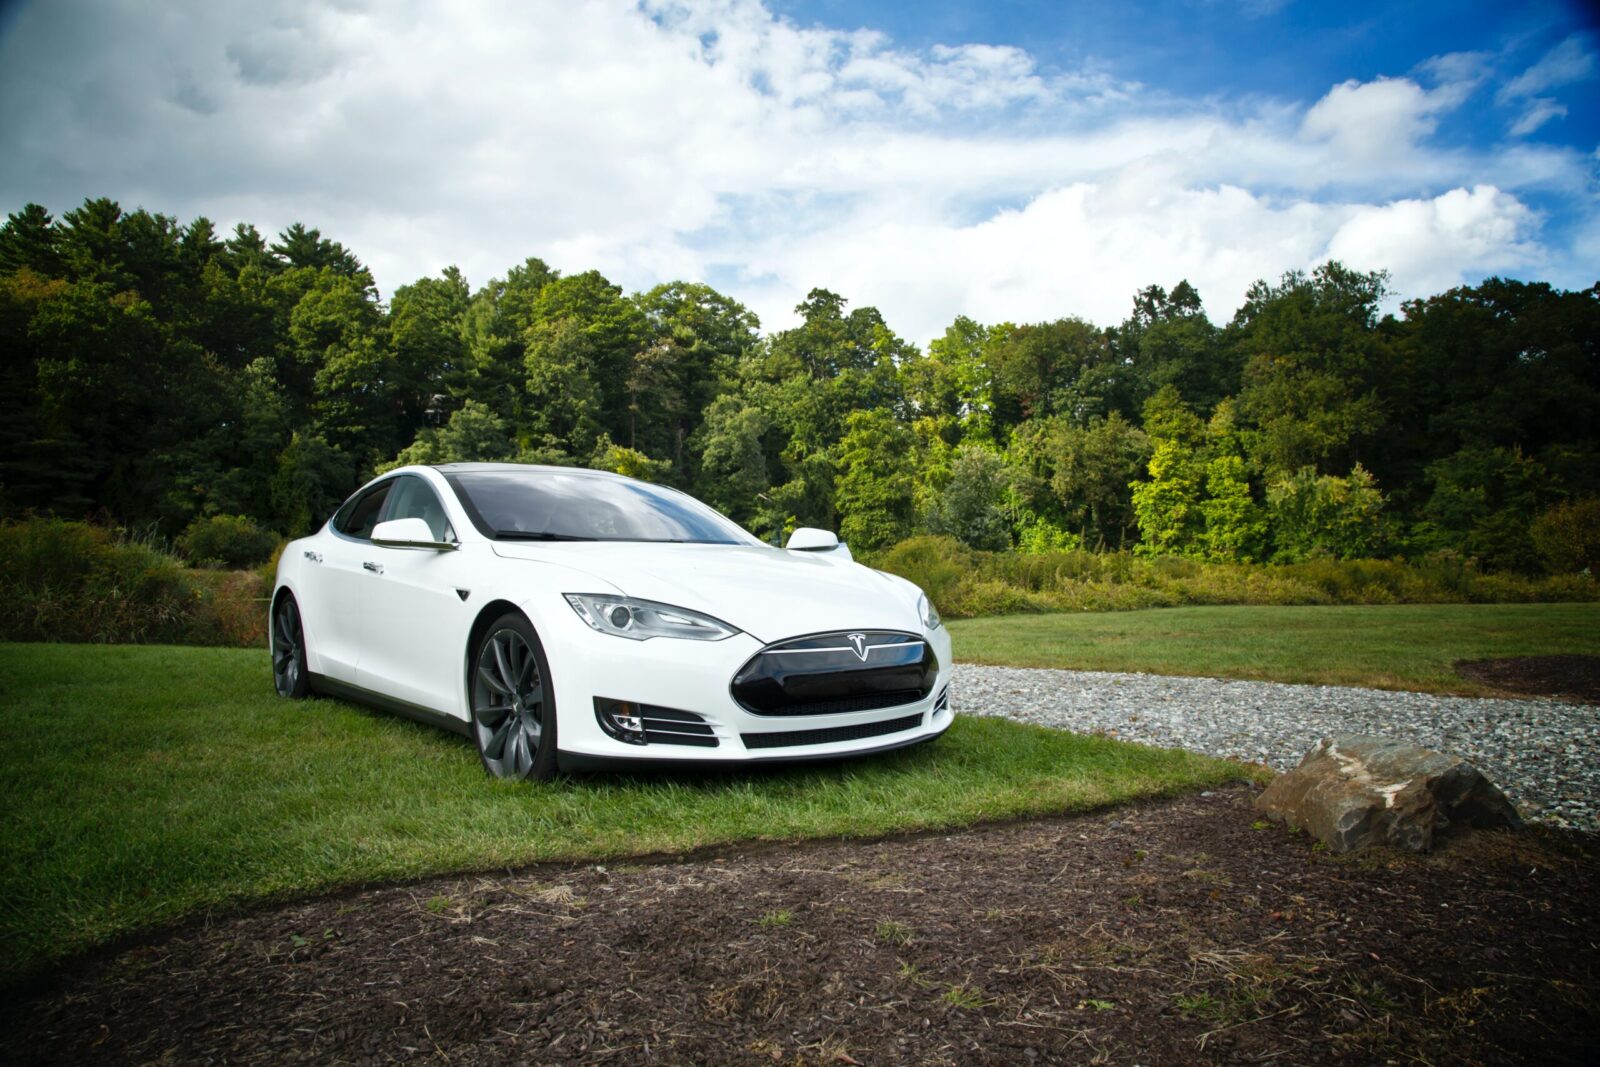 Tesla Roadside Assistance review: Is it really good enough?